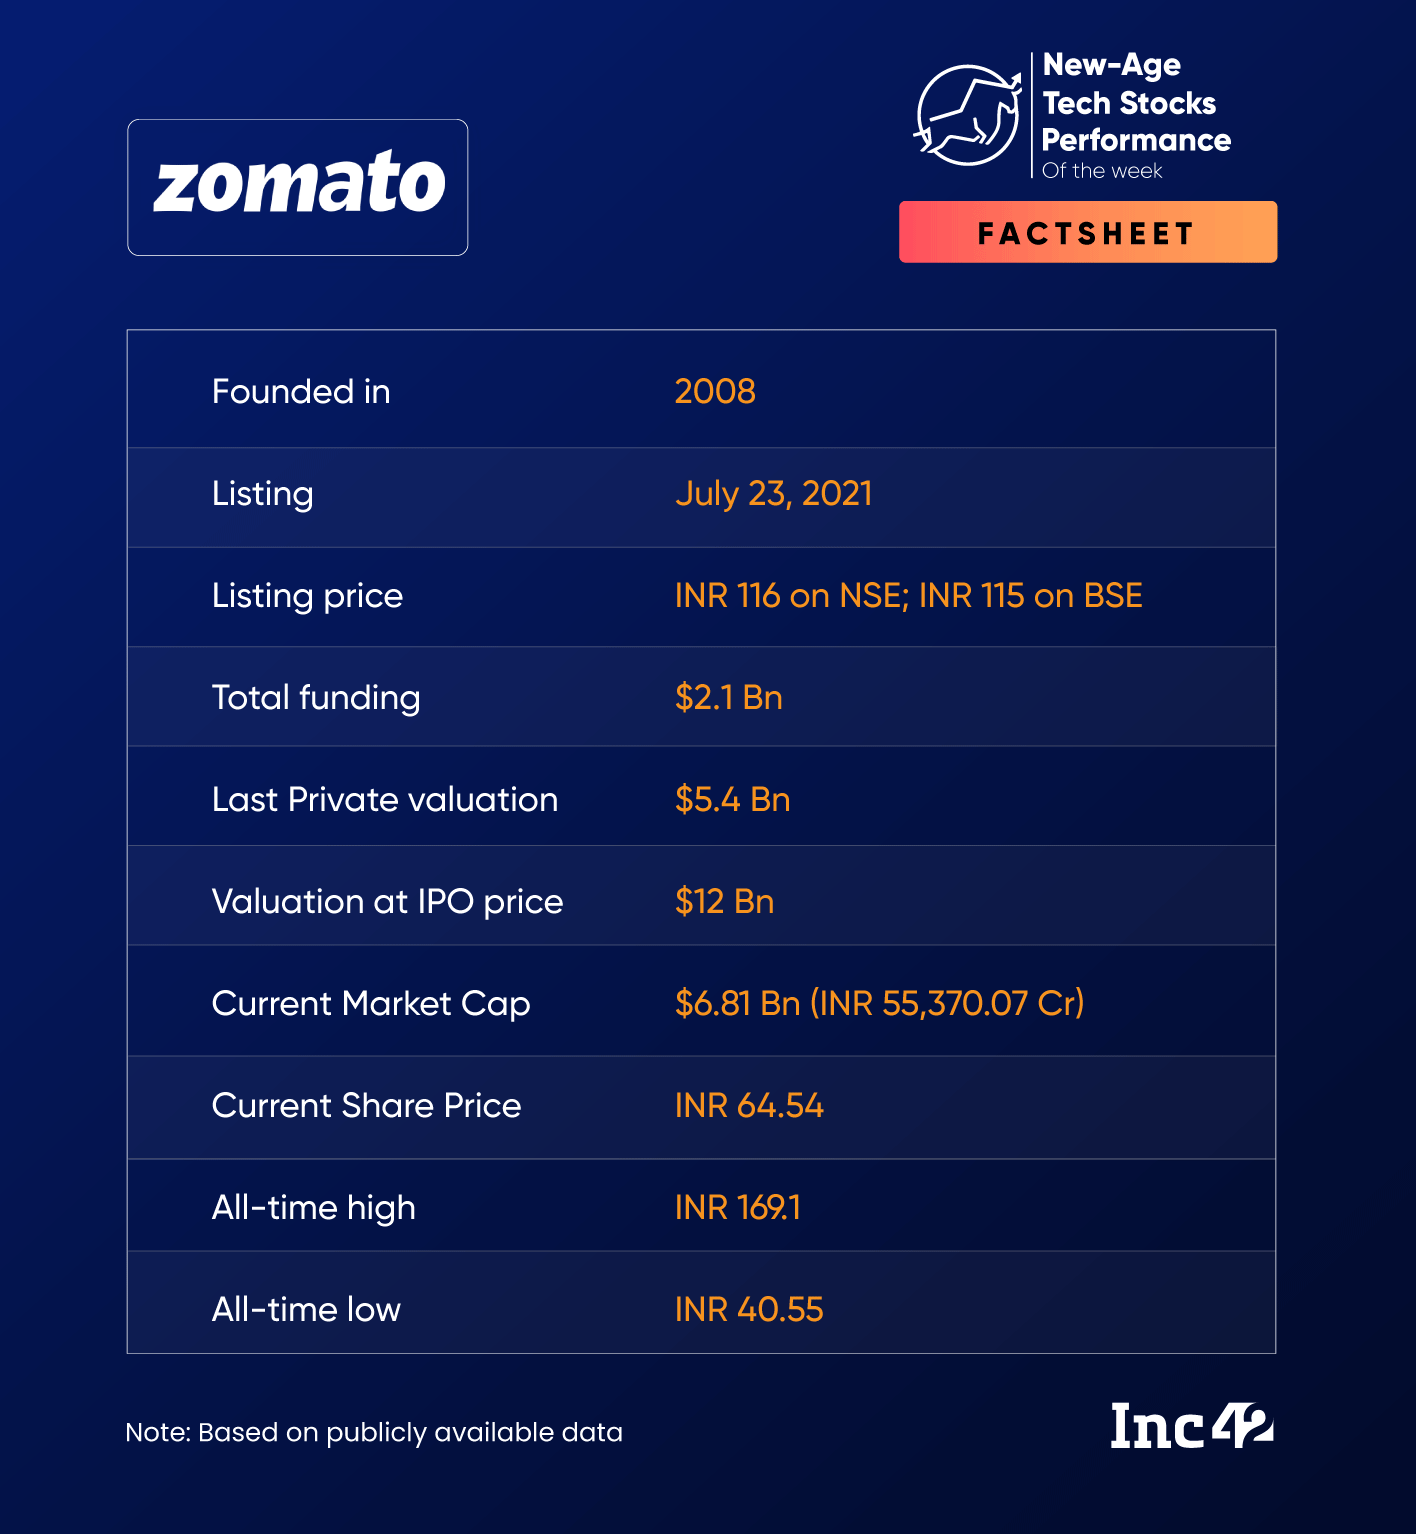 Zomato Reports Better-Than-Expected Q4